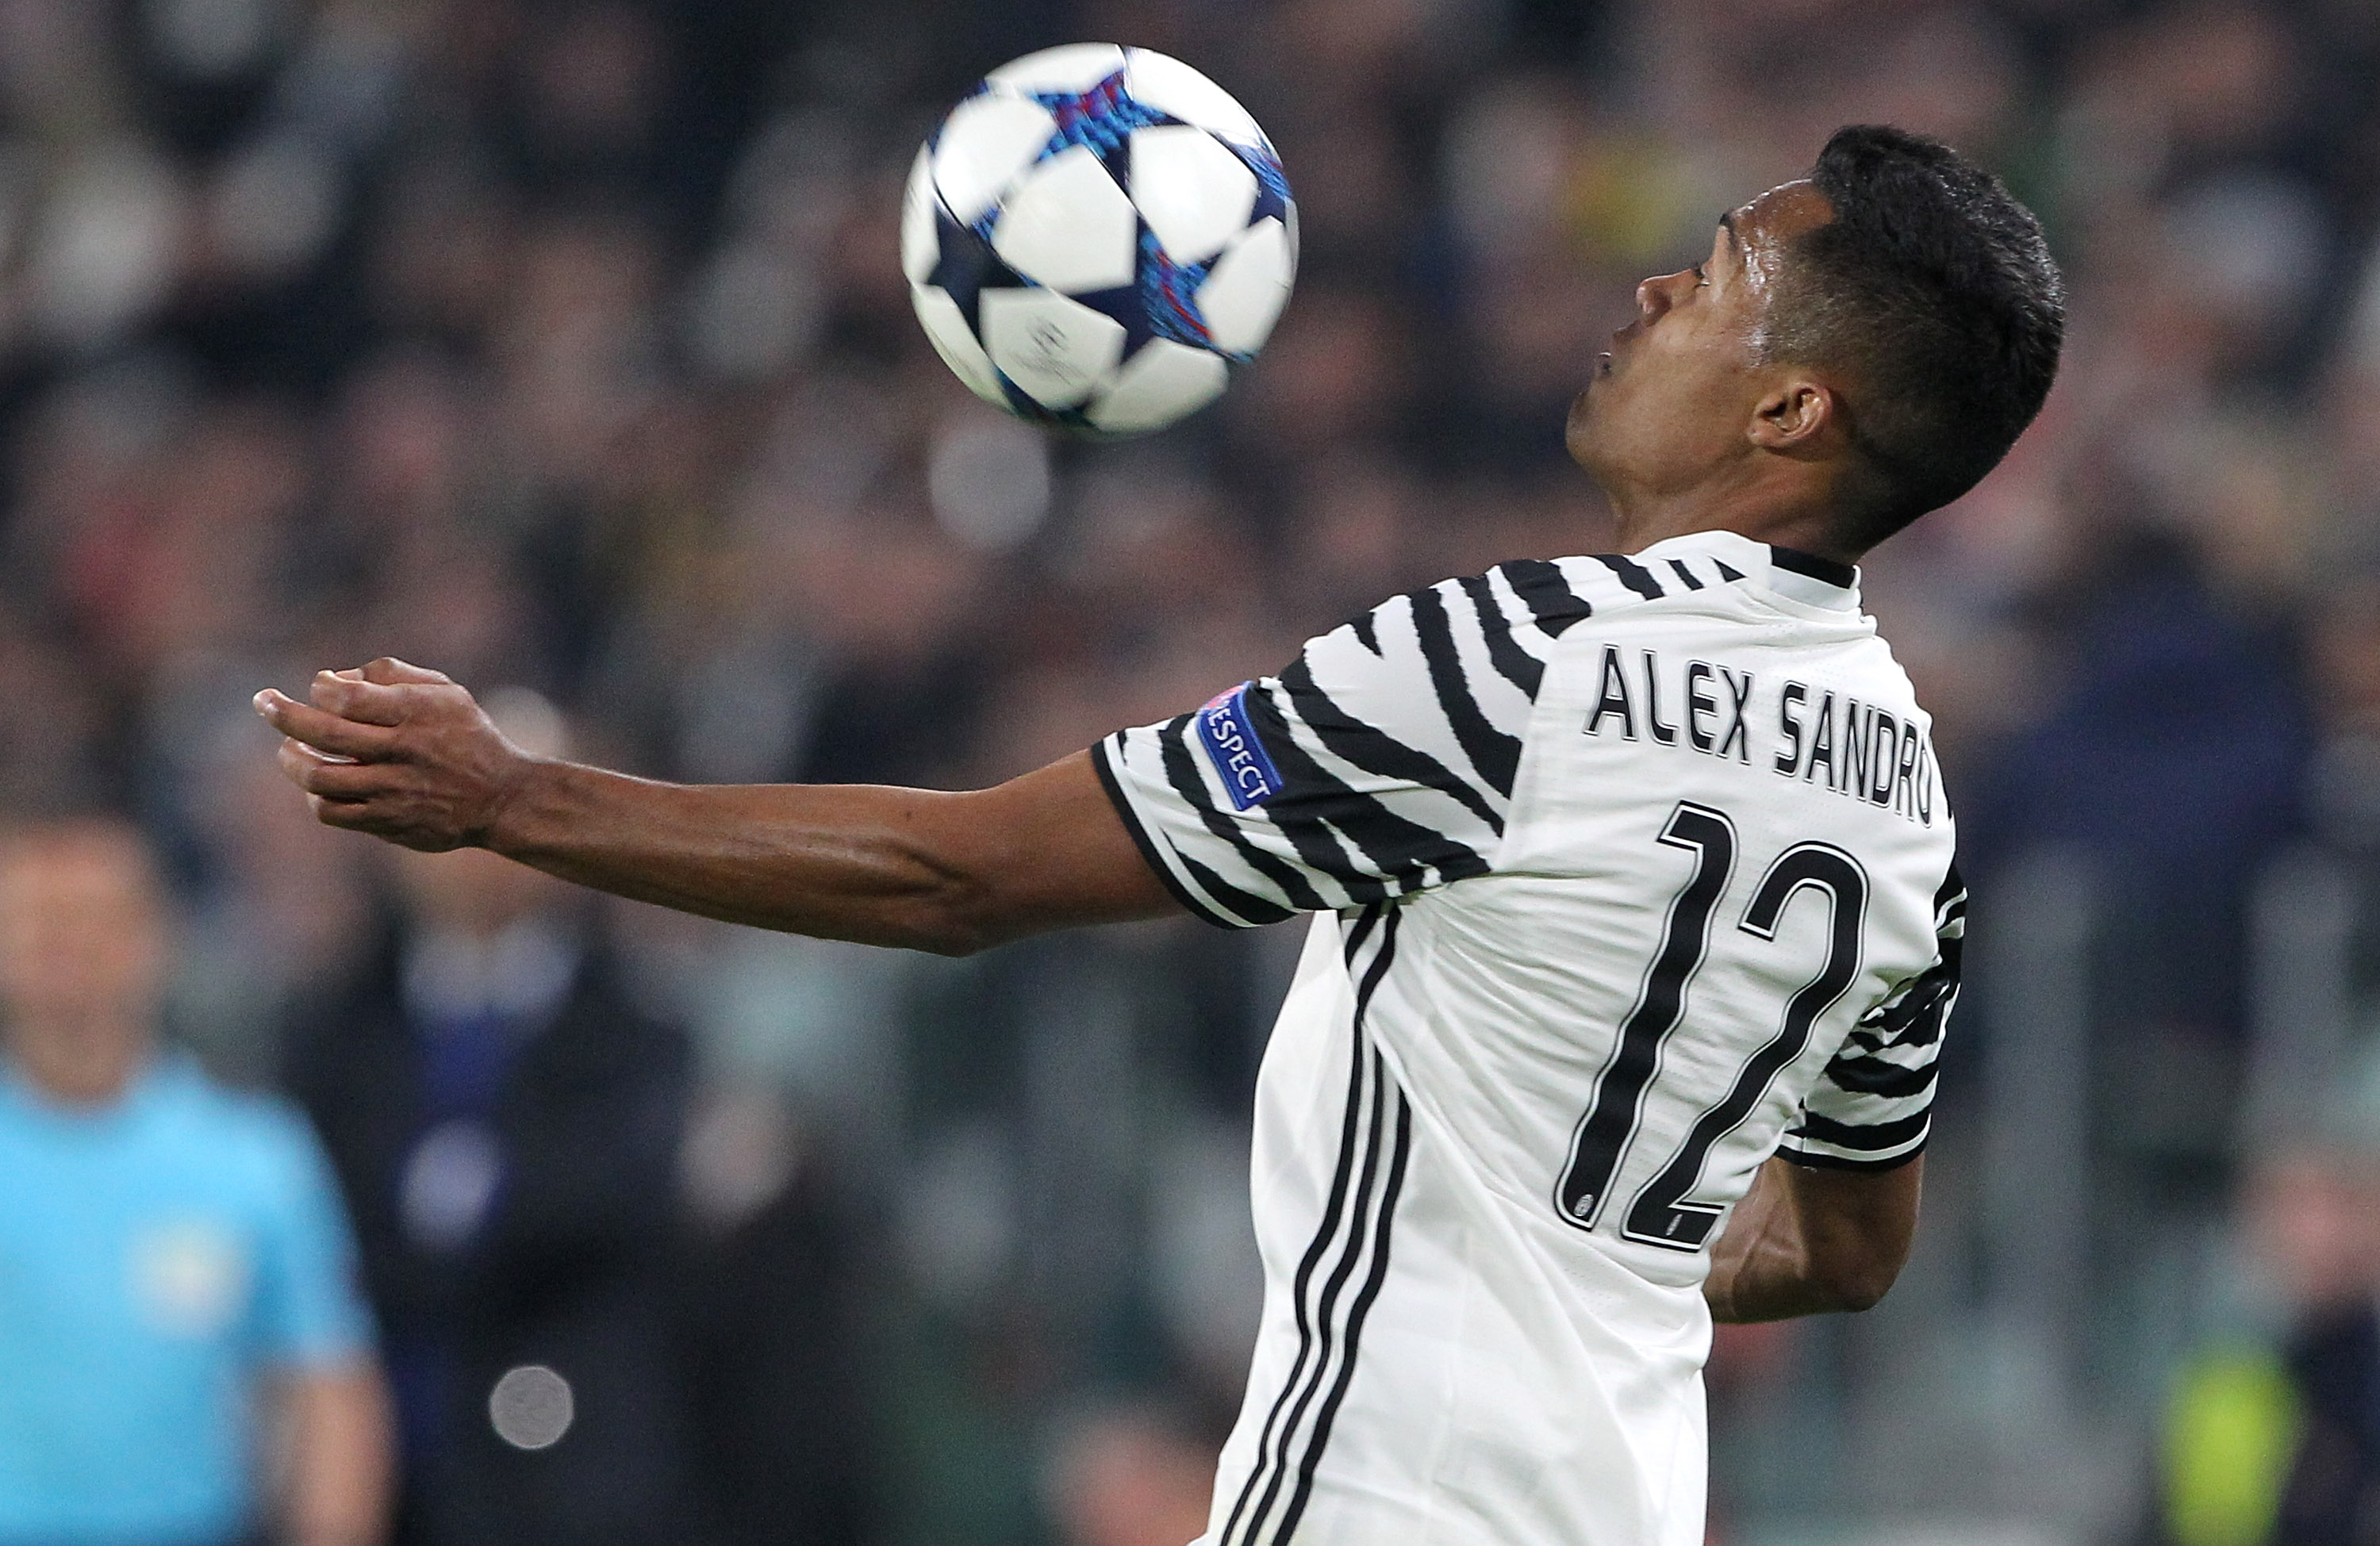 TURIN, ITALY - MARCH 14:  Alex Sandro of Juventus FC controls the ball during the UEFA Champions League Round of 16 second leg match between Juventus and FC Porto at Juventus Stadium on March 14, 2017 in Turin, Italy.  (Photo by Marco Luzzani/Getty Images)